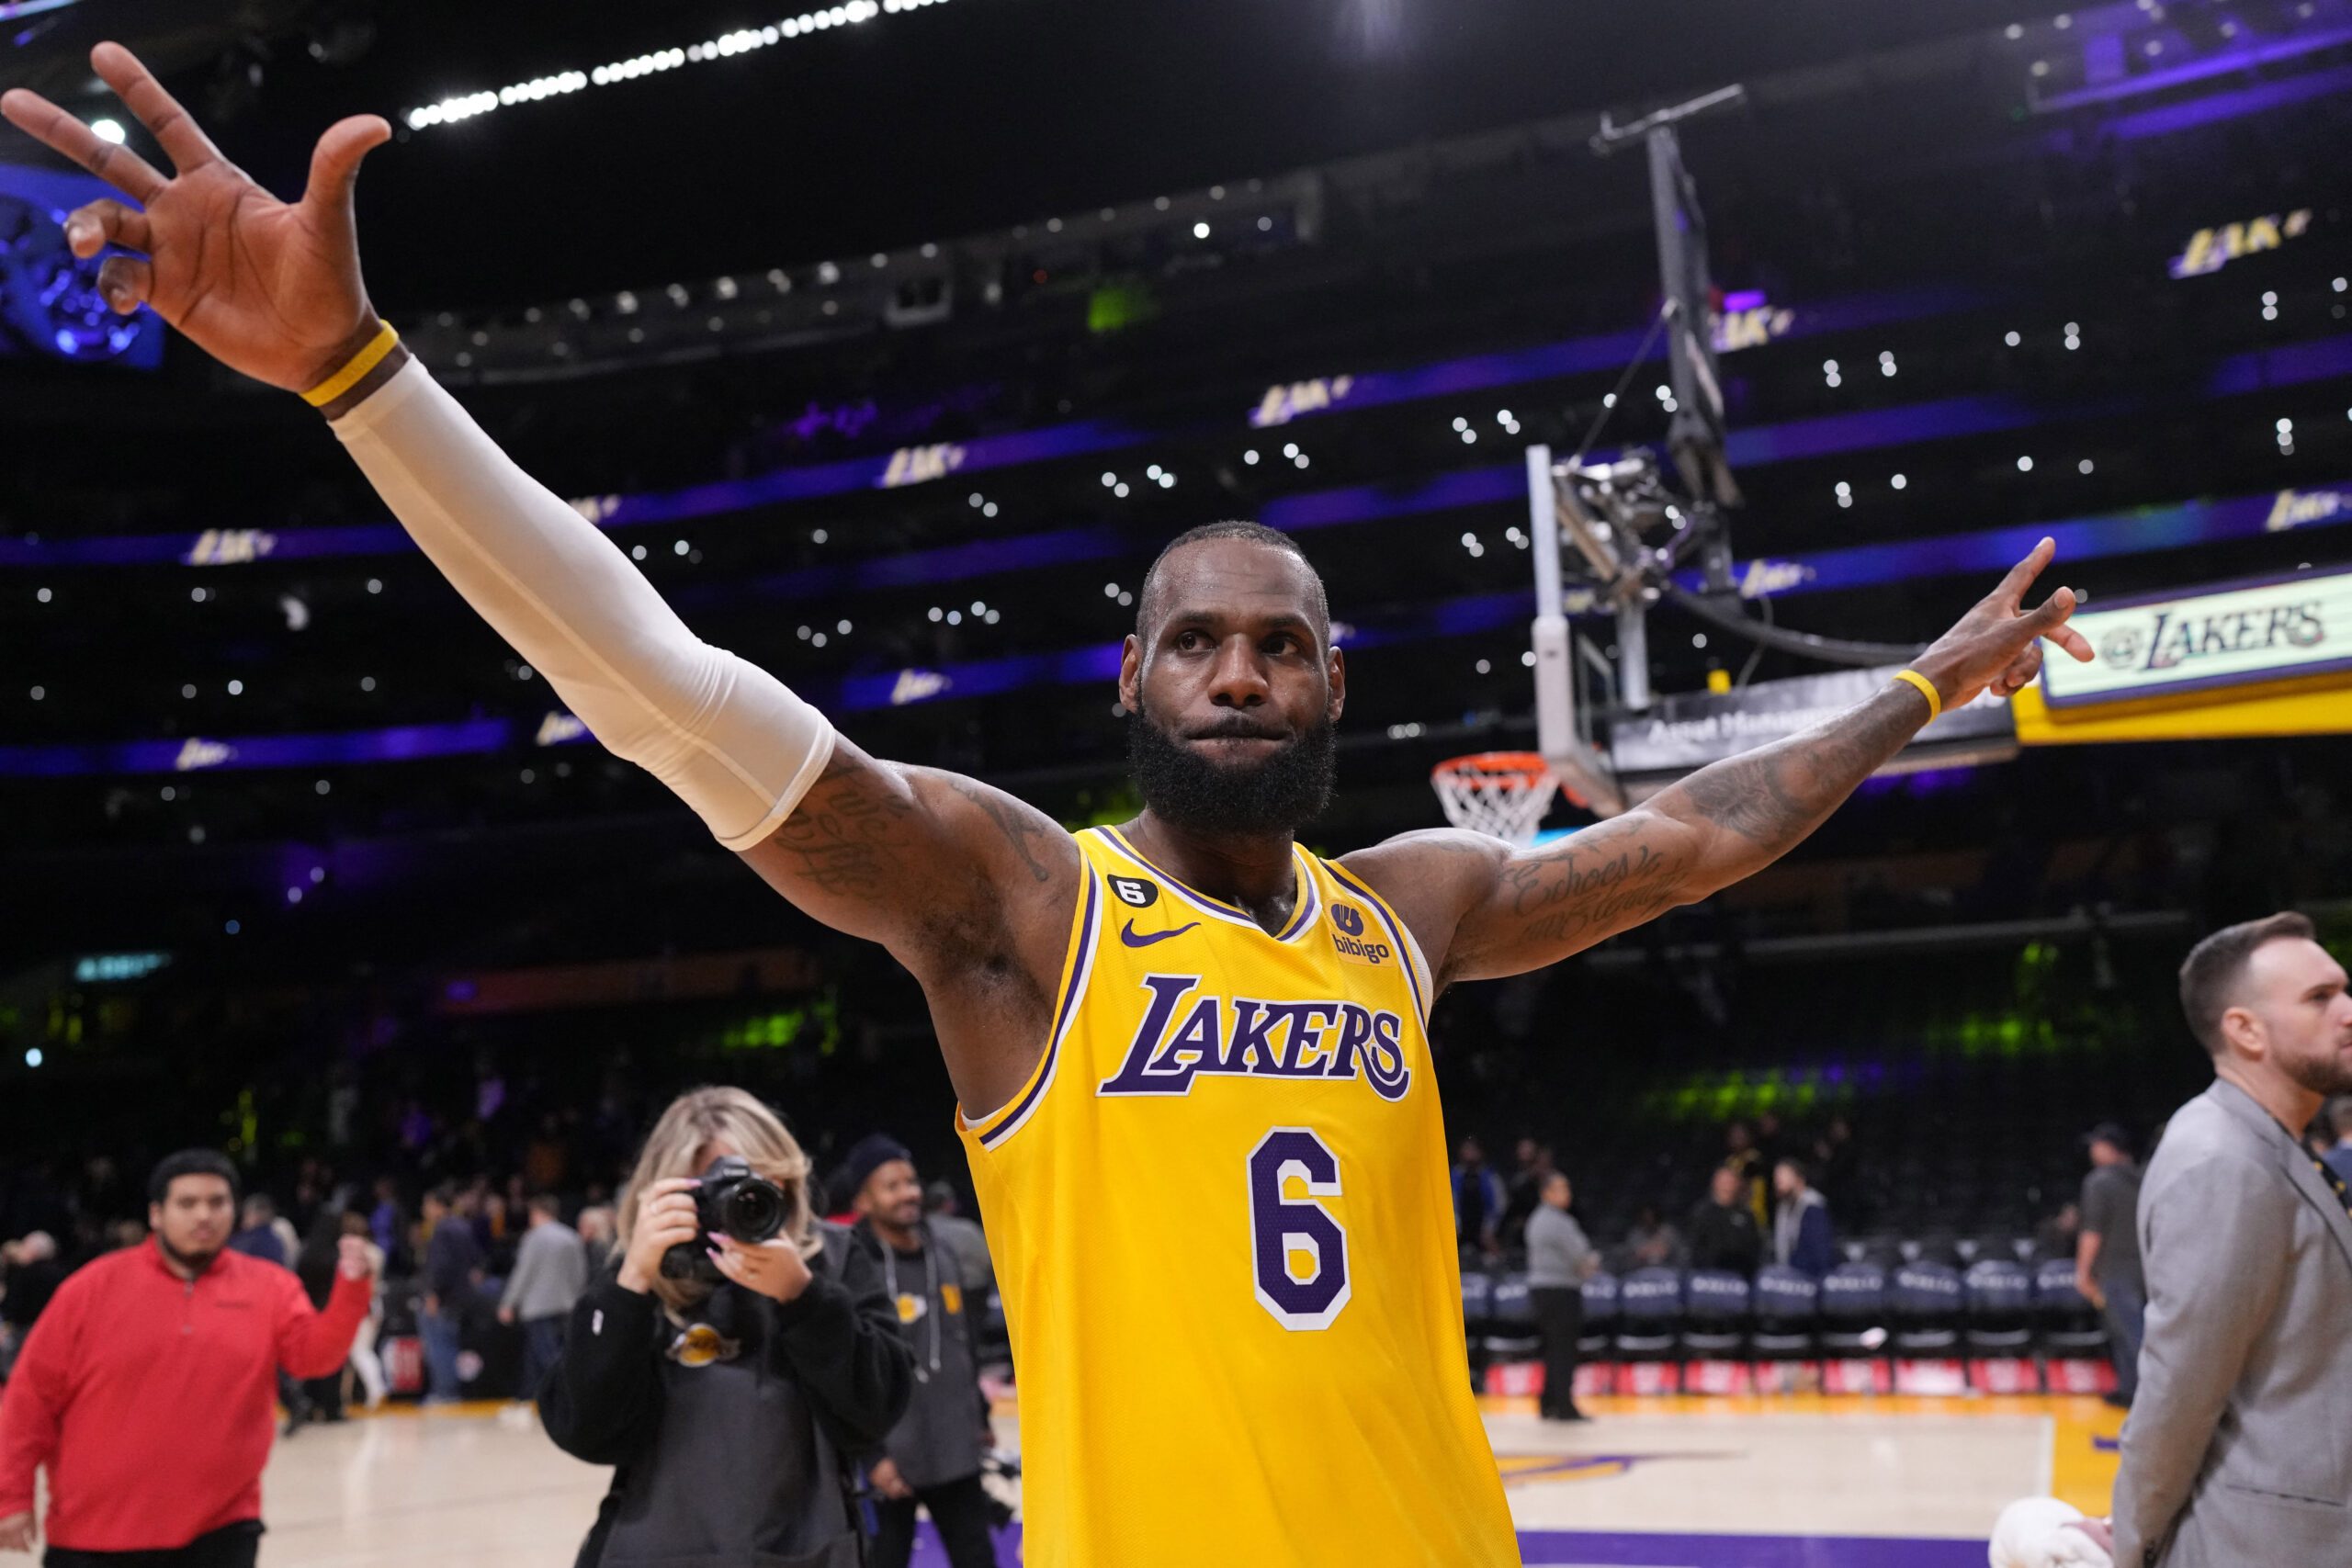 Lakers star LeBron James shares 'respect and love' for Manila